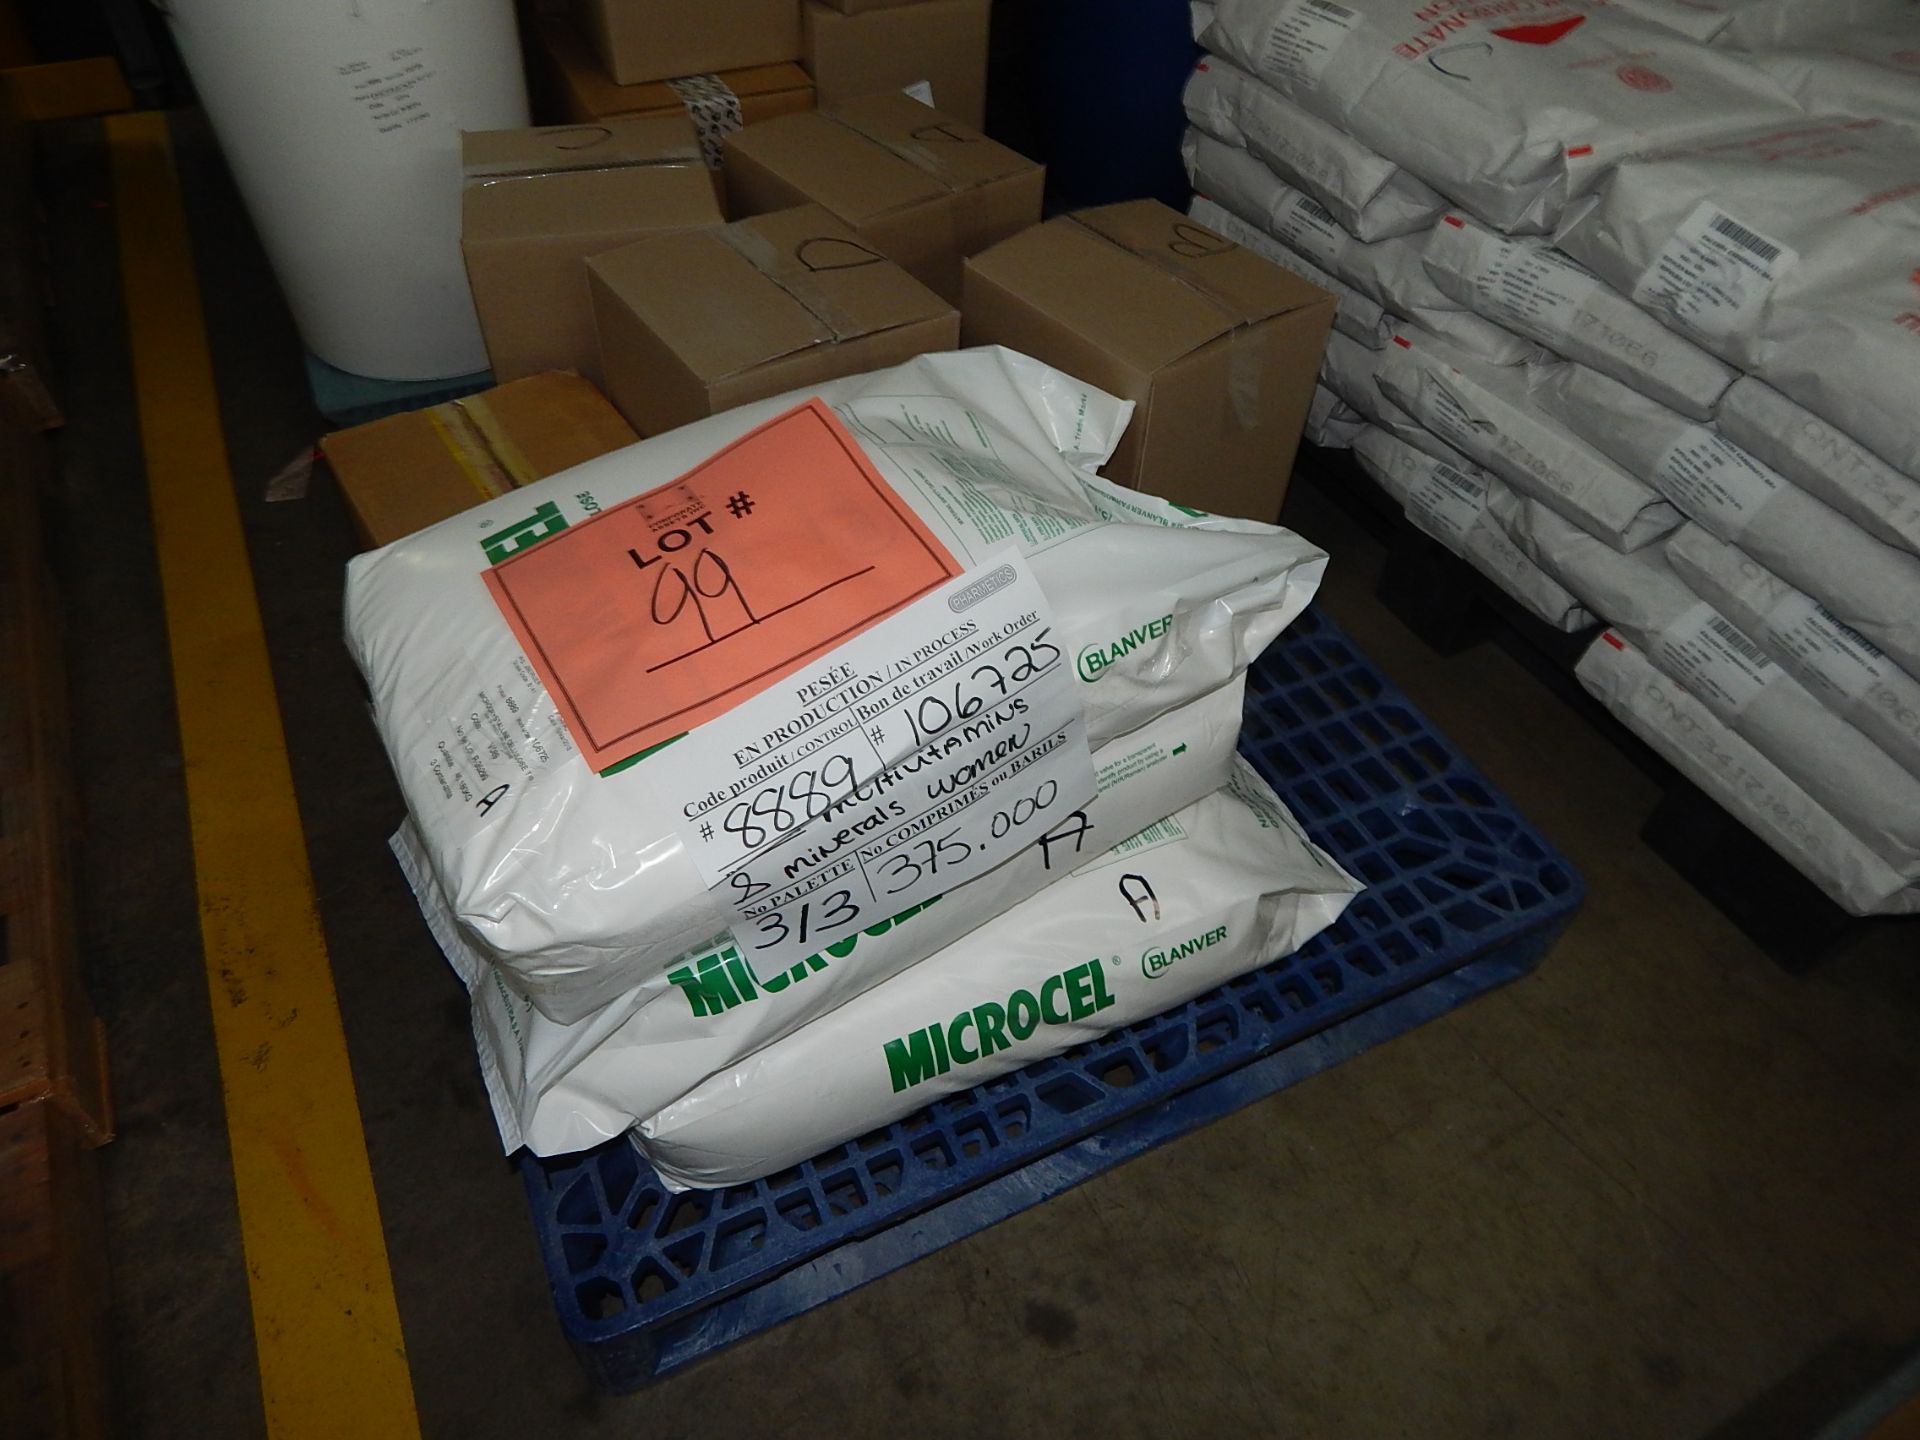 LOT/ SKID WITH CONTENTS CONSISTING OF BAGS OF MICROCYSTALLINE, ACETAMINOPHEN AND PHARMCEUTICAL